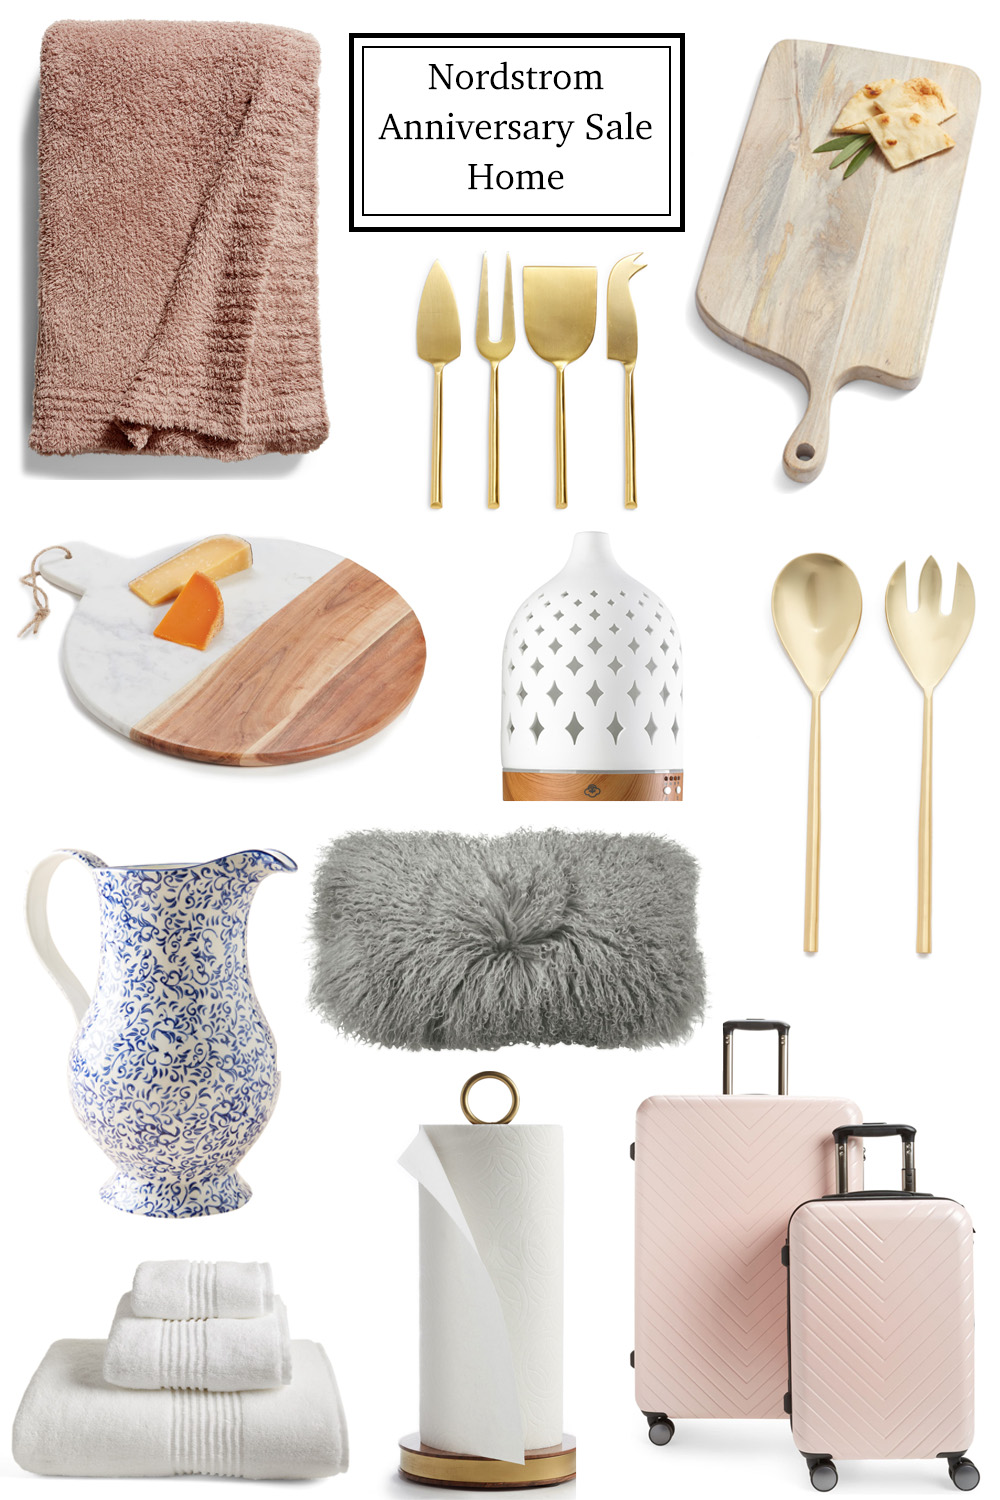 NORDSTROM ANNIVERSARY SALE HOME